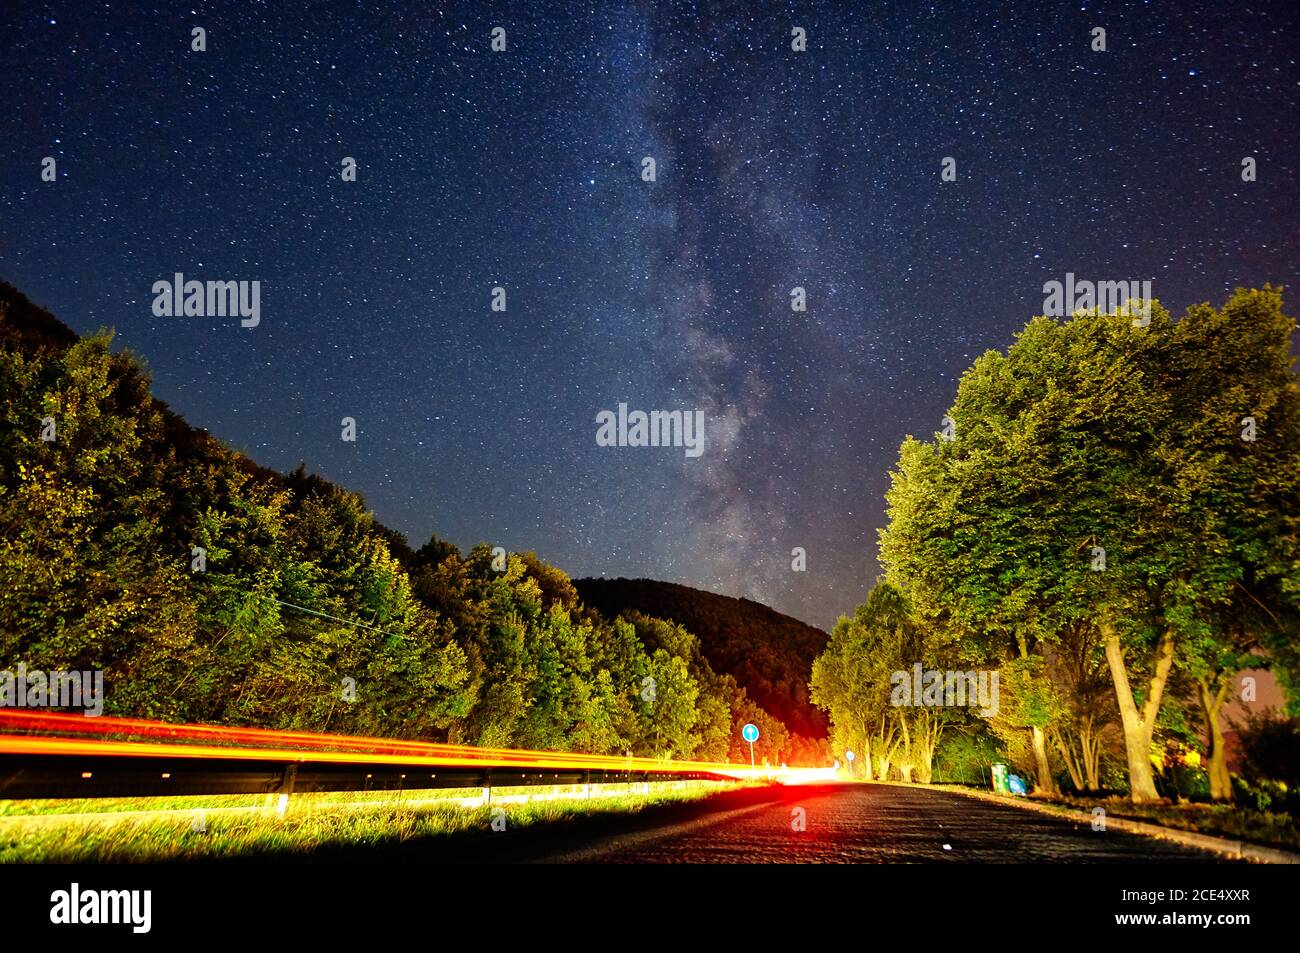 Milky Way galaxy on the side of the highway near Ulm with car trails Stock Photo